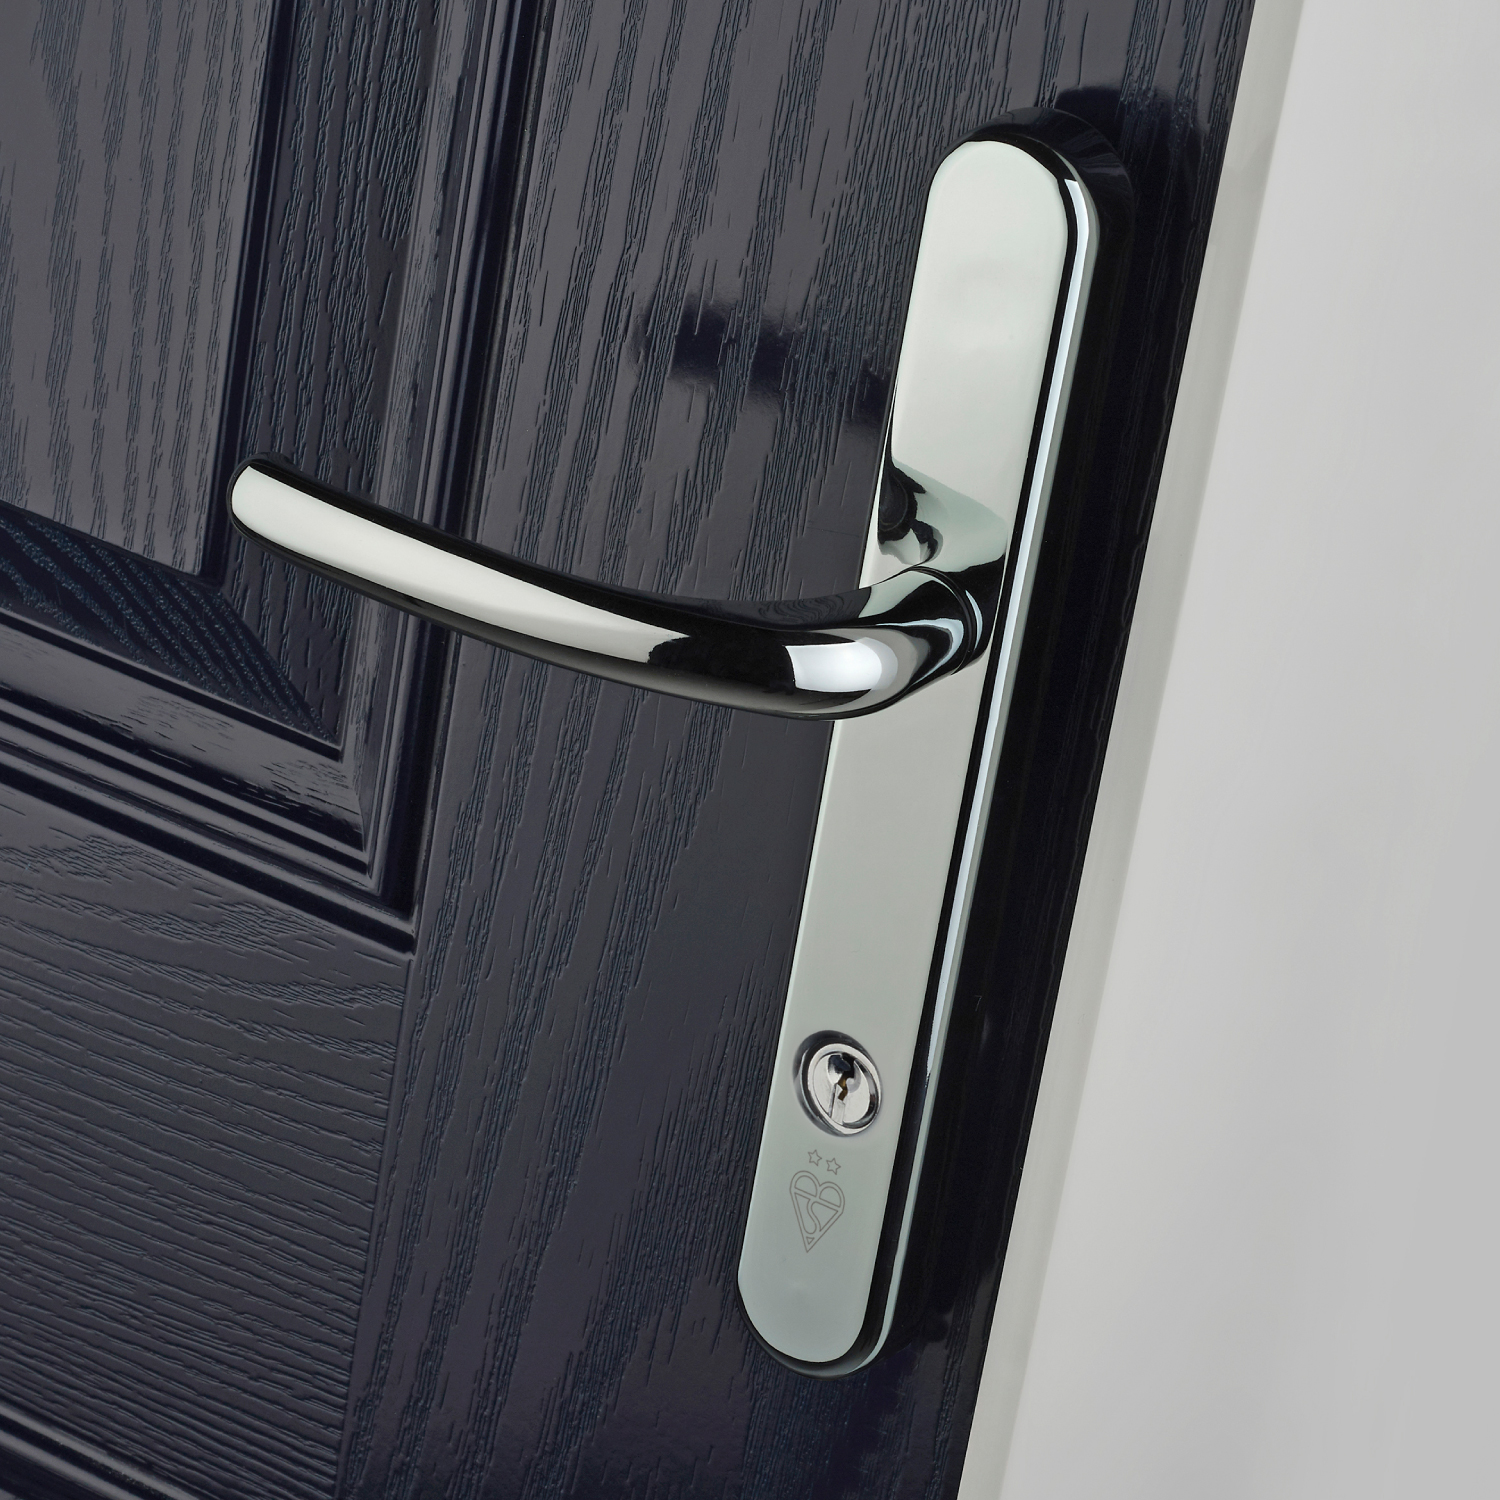 ERA has extended its premium range of Fab&Fix suited hardware with the launch of its new Berwick High Security 2* Door Handle.